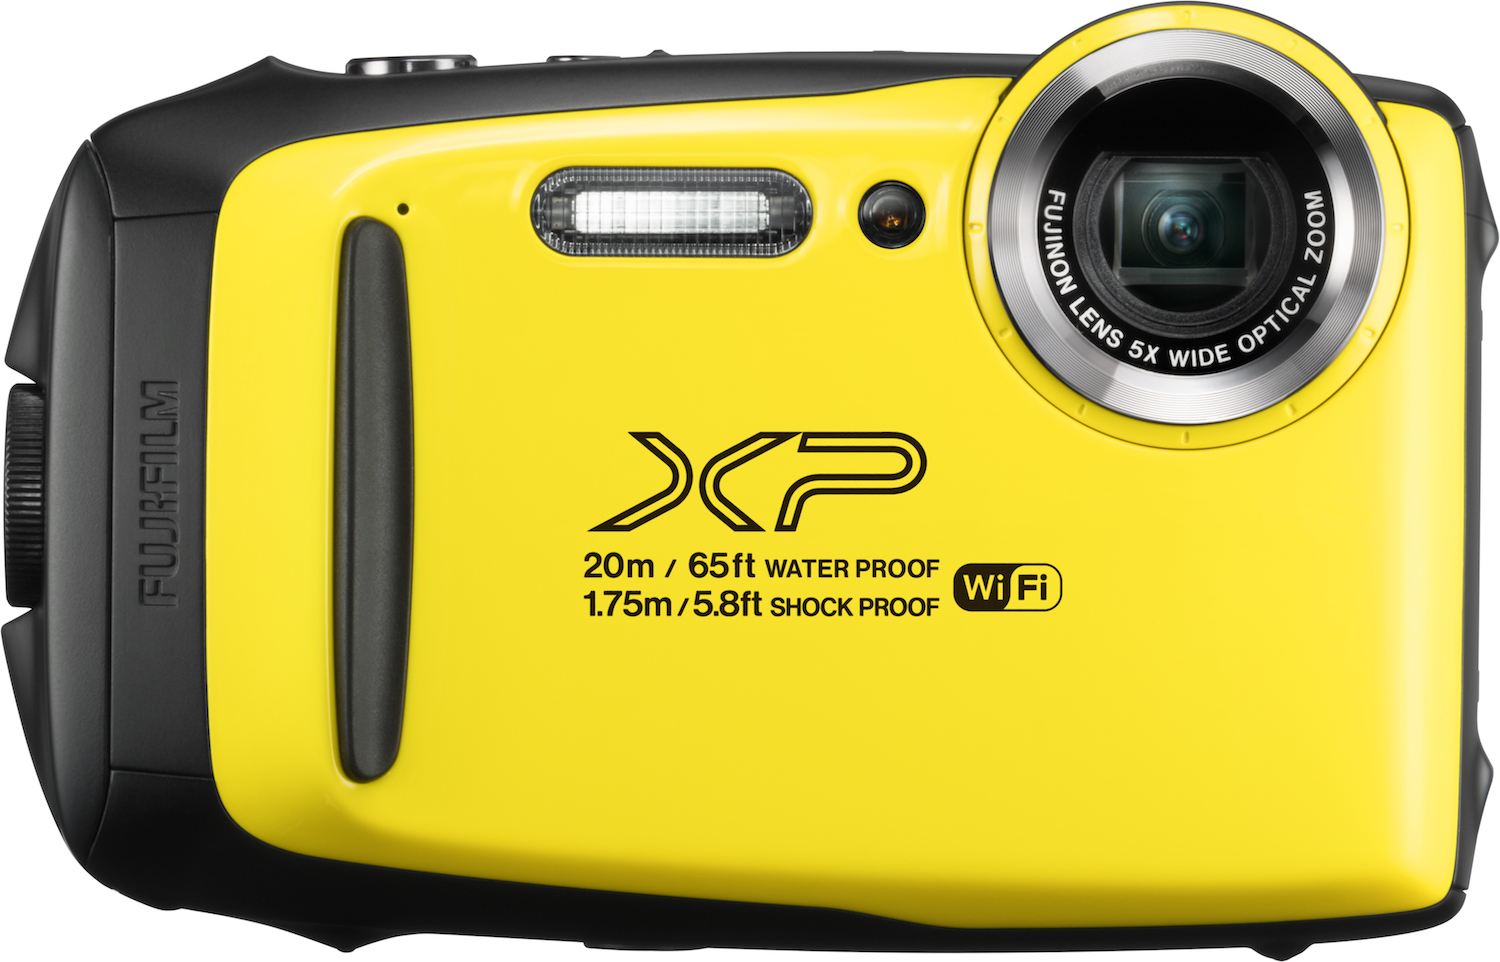 Fujifilm Adds Bluetooth Connectivity to FinePix XP130 Waterproof